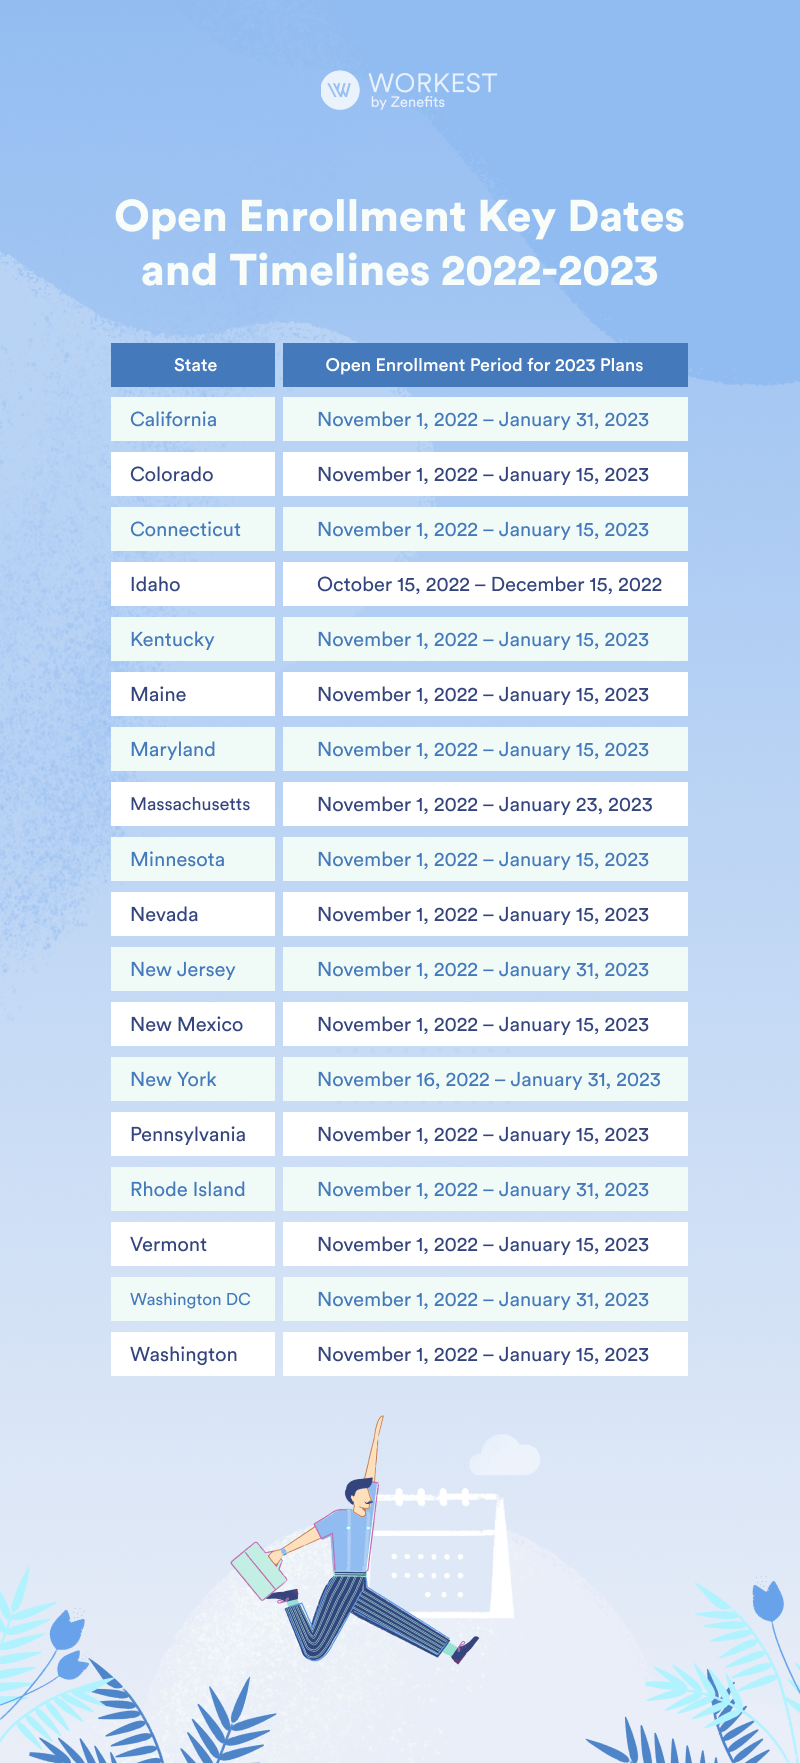 Open Enrollment 2022_2023 Prepare With These Timelines and Important Dates